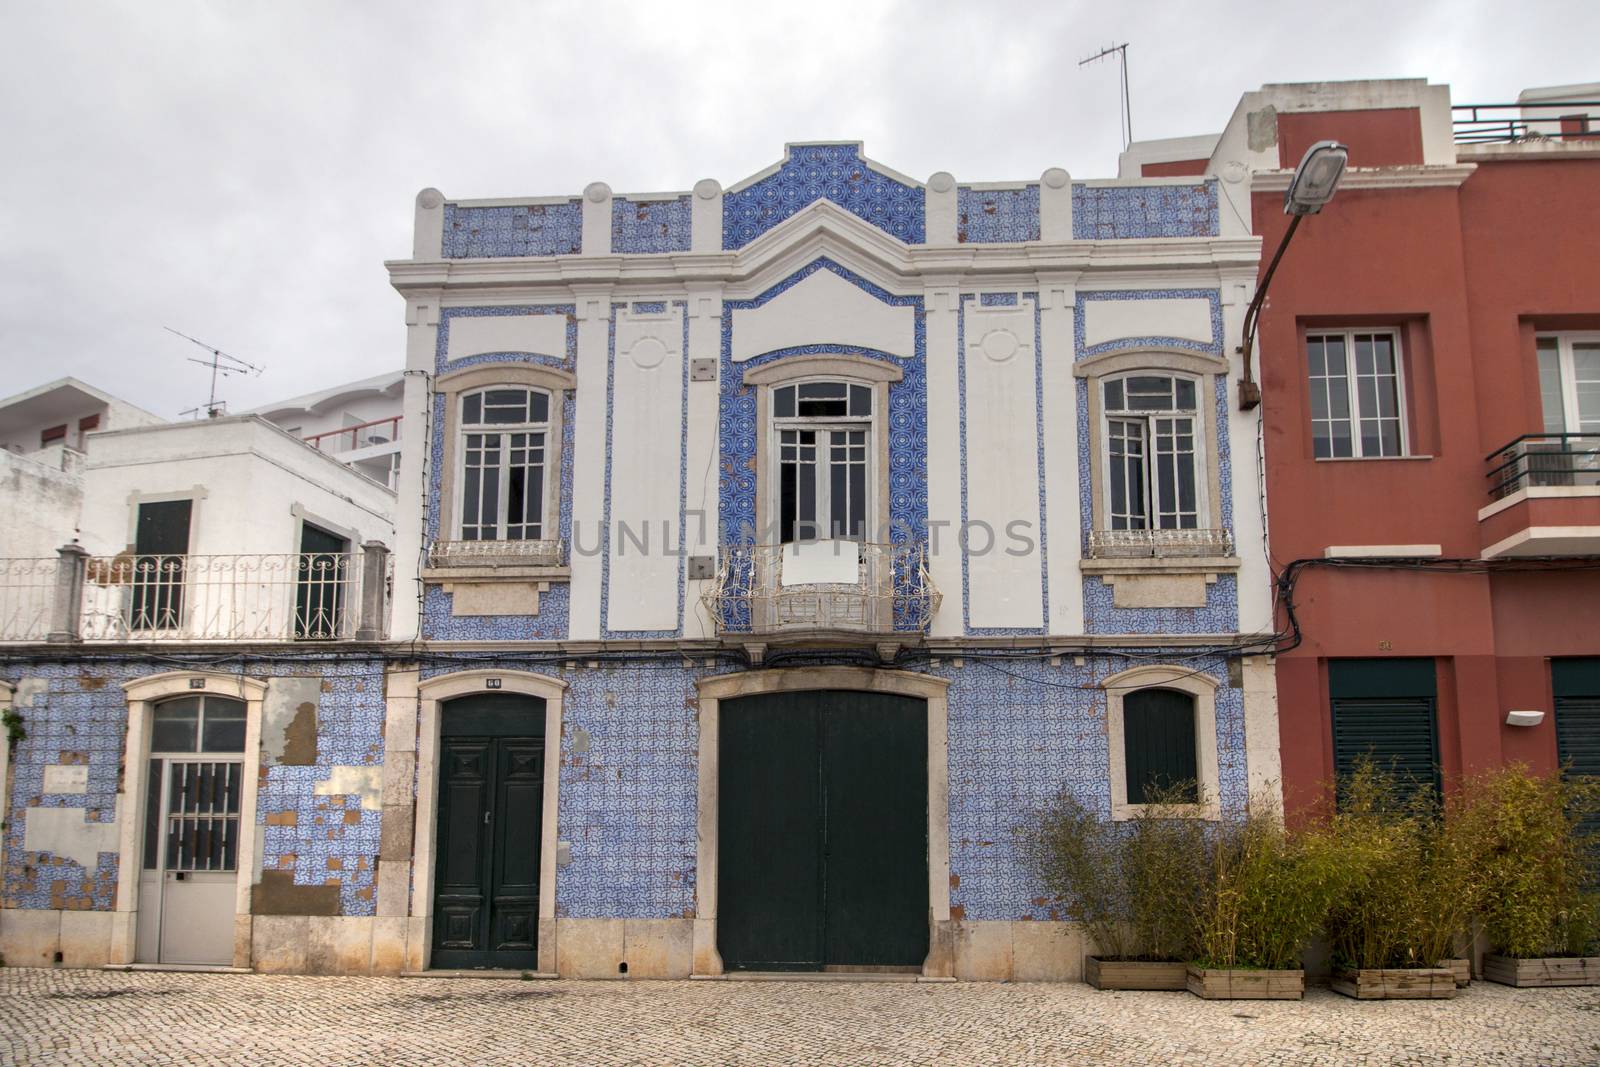 portuguese building with blue azulejo tiles, typical of European mediterranean countries.